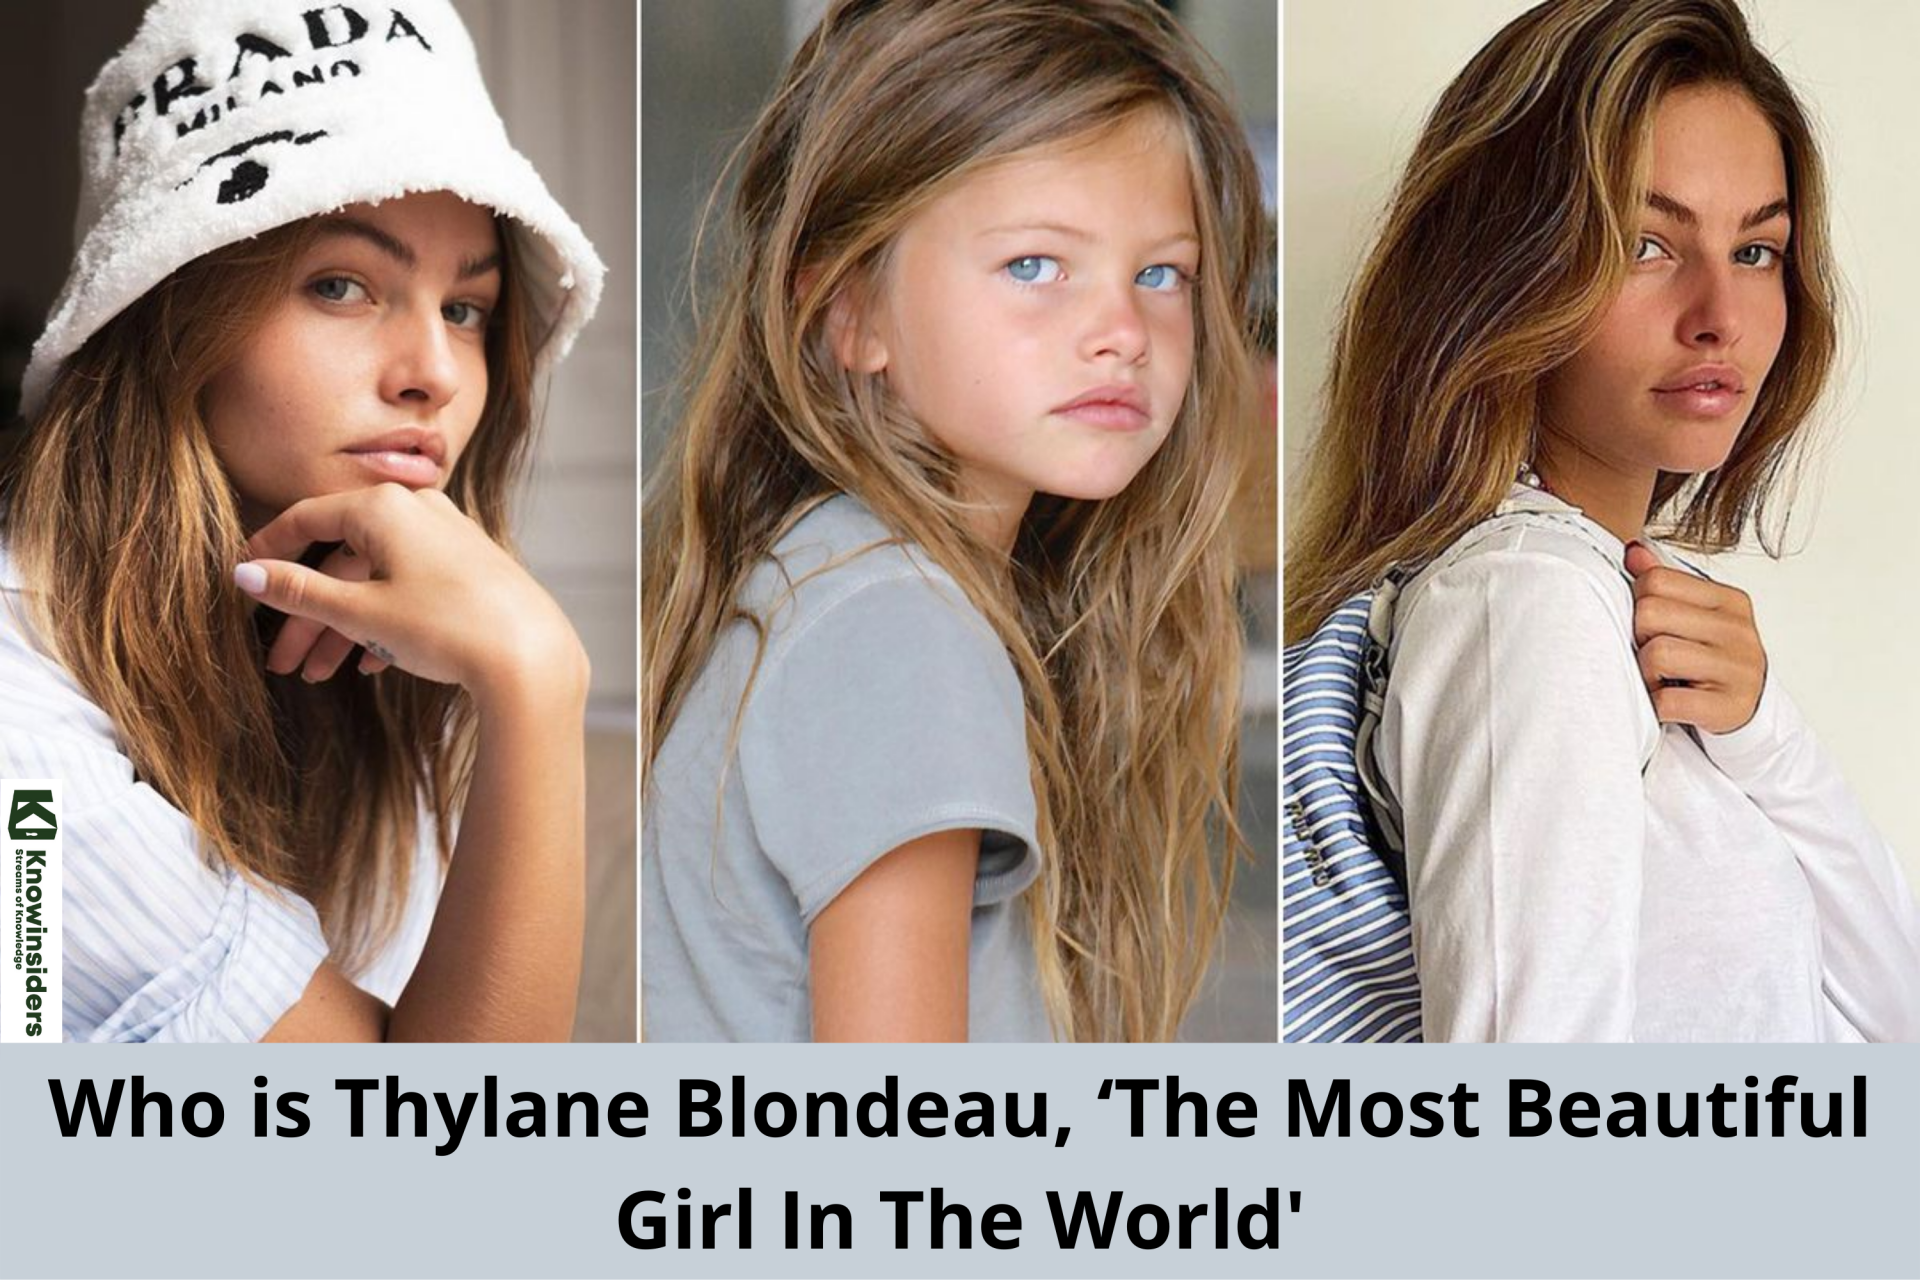 Who is Thylane Blondeau, ‘The Most Beautiful Girl In The World'